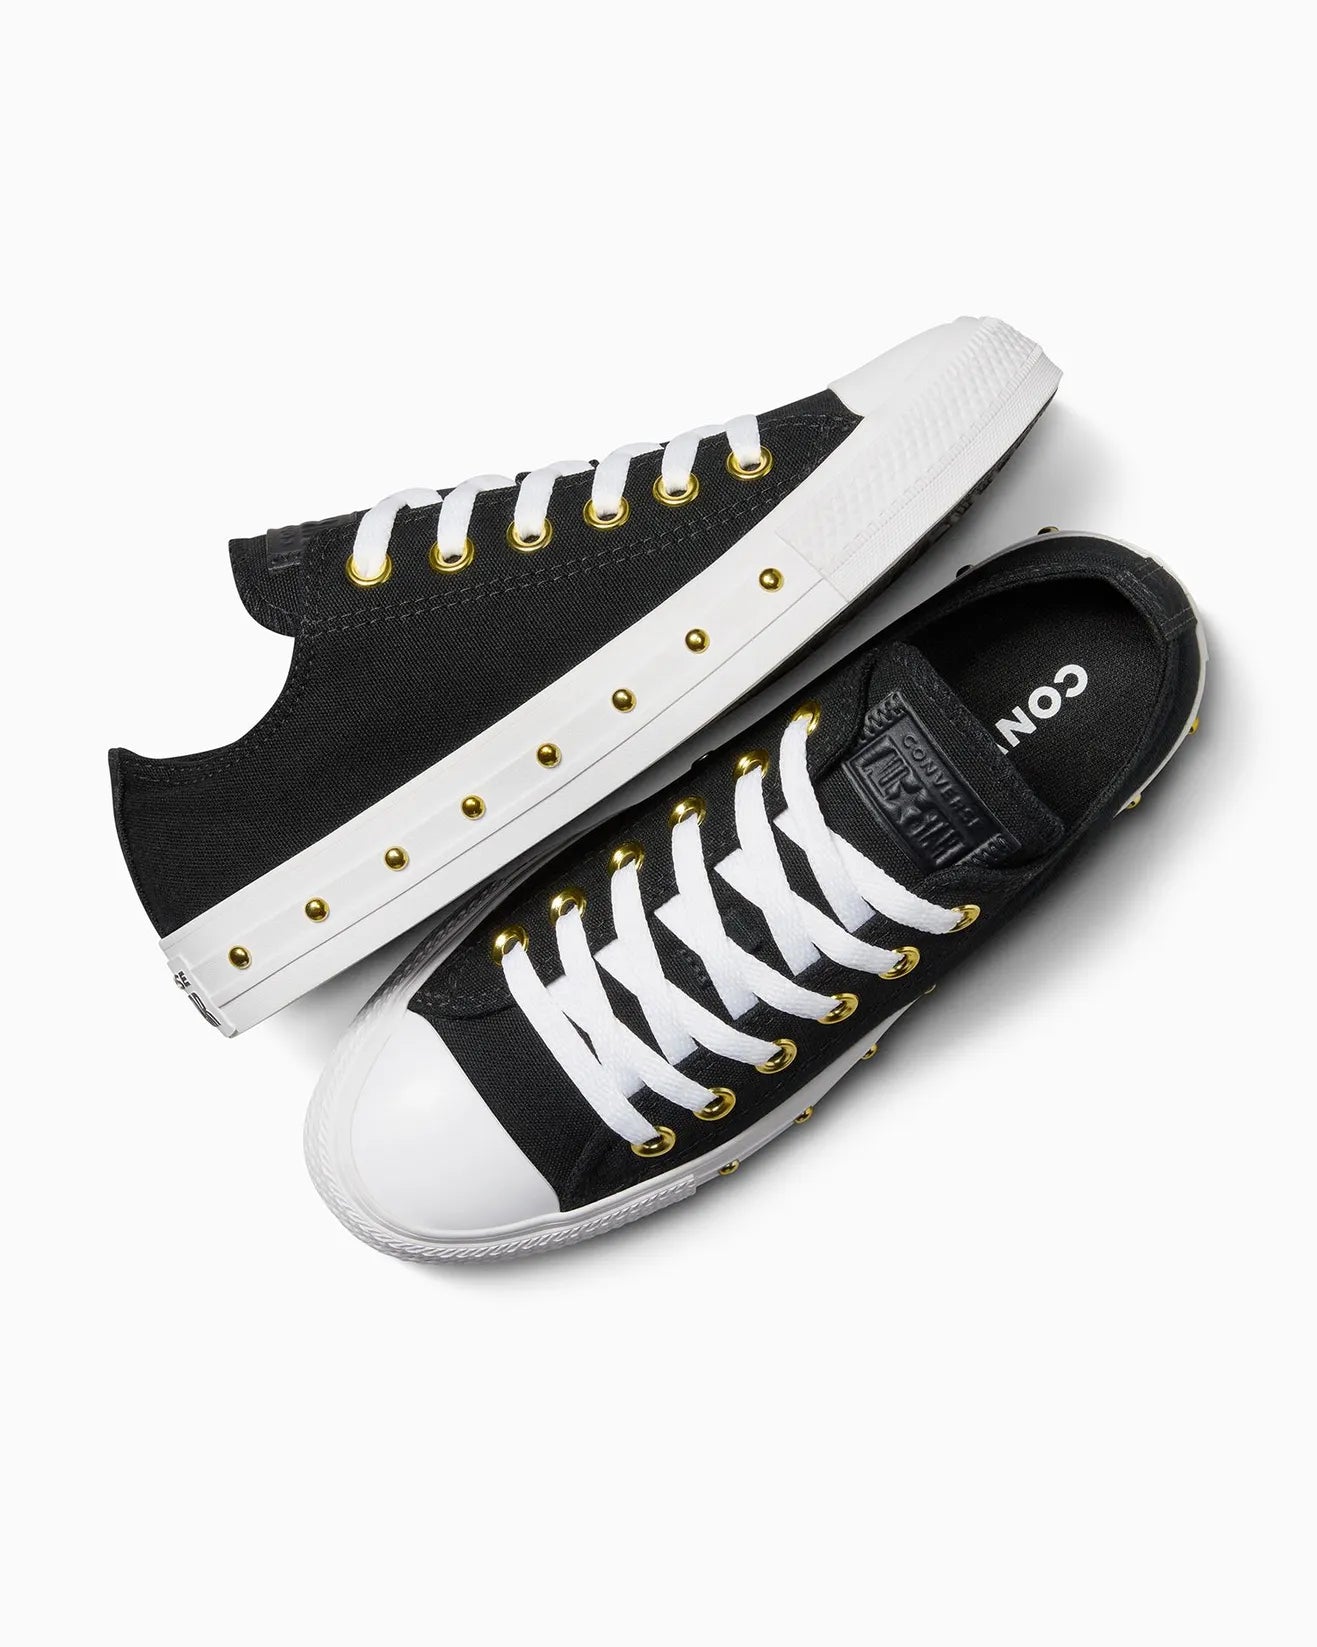 - Converse Chuck Taylor Womens Star Studded Lo -Black/White/Gold - (A07907) - OG- R1L7